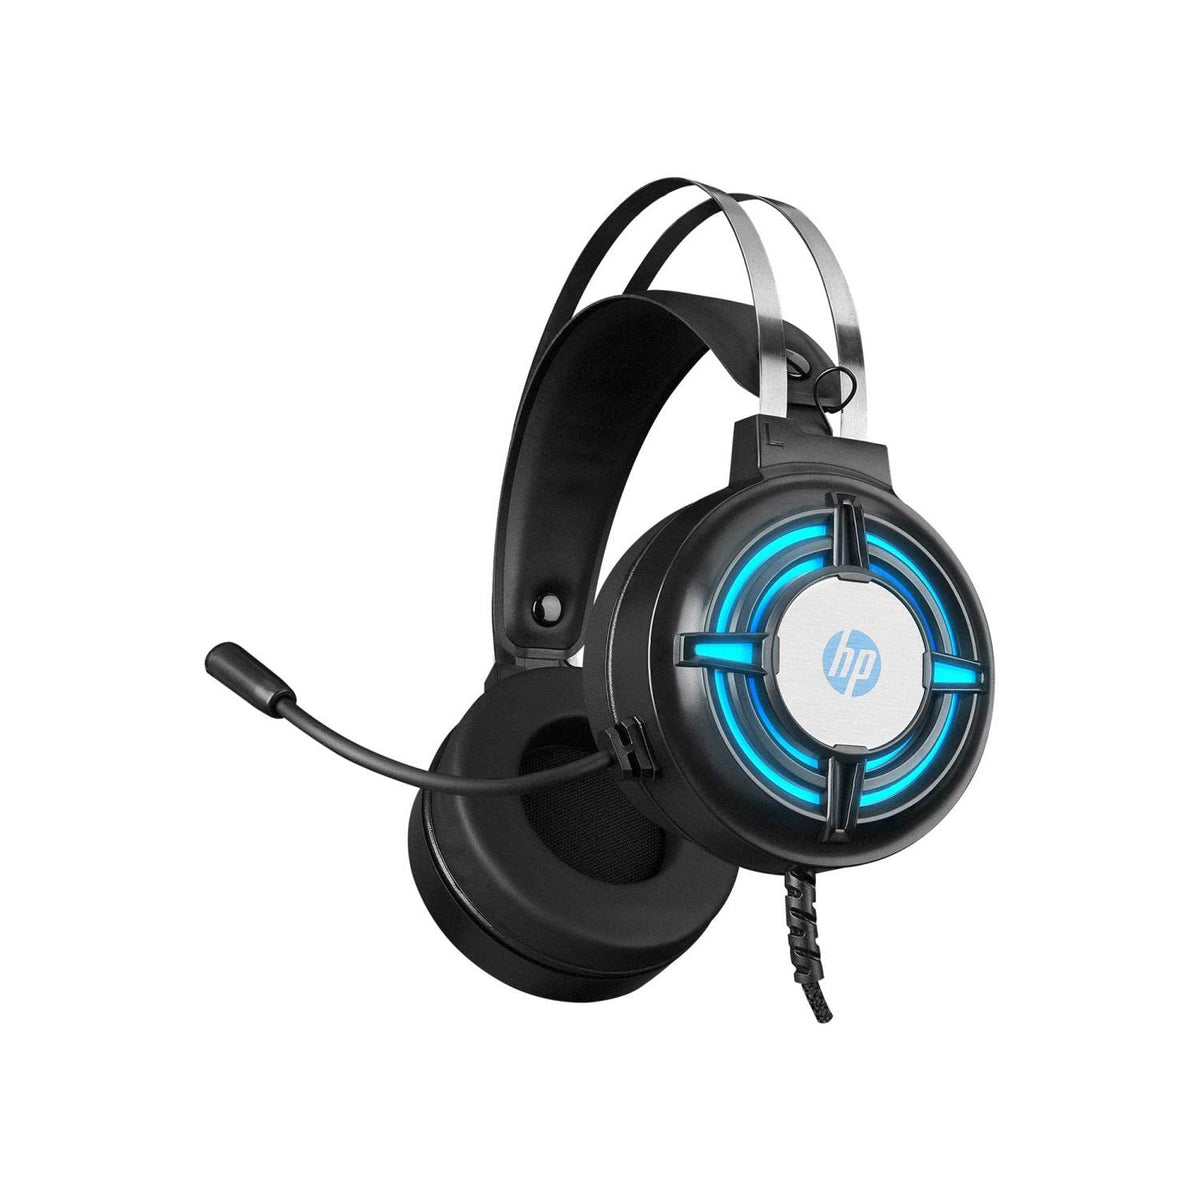 Hp H120 Gaming Headset with Mic Control (black)